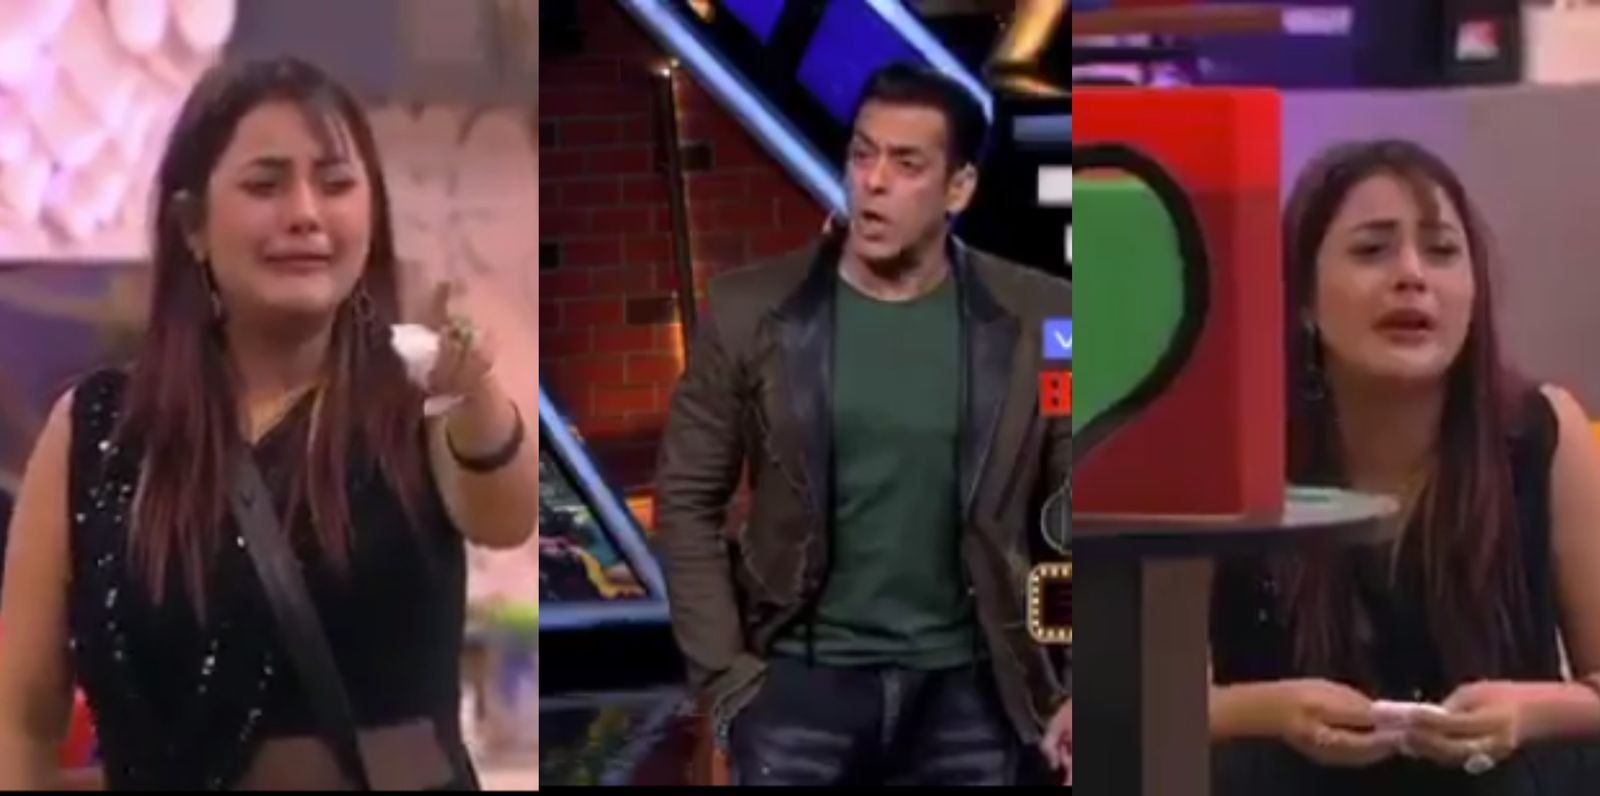 Bigg Boss 13 Preview: Salman Khan To Throw Shehnaaz Gill Out Of The House? Deepika And Chhapaak’s Team To Surprise The Housemates